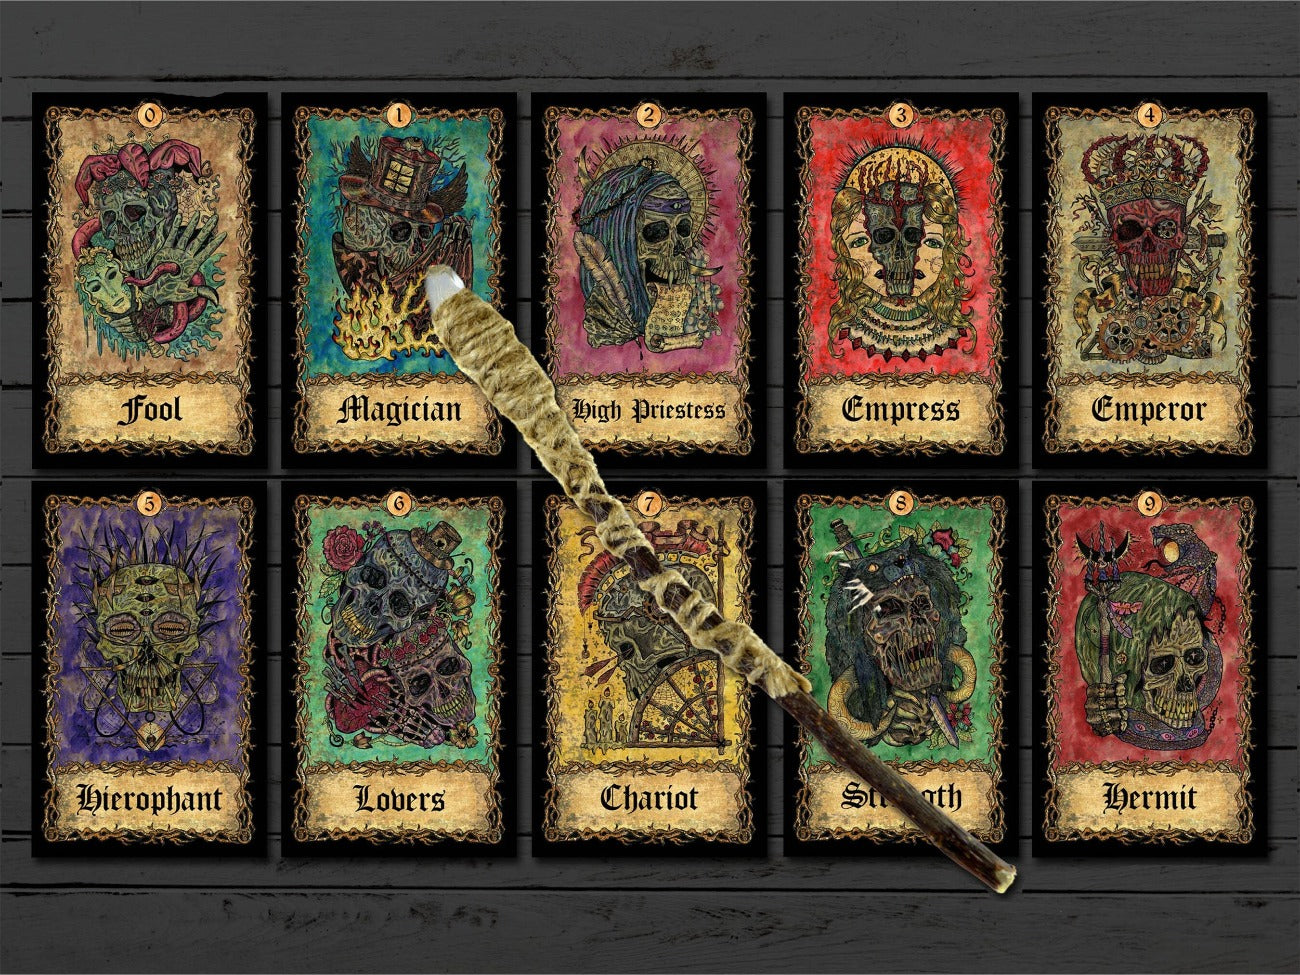 The first 10 Major Arcana cards of the Grim Reaper deck include Fool, Magician, High Priestess, Empress, Emperor, Hierophant, Lovers, Chariot, Strenght, and Hermit.